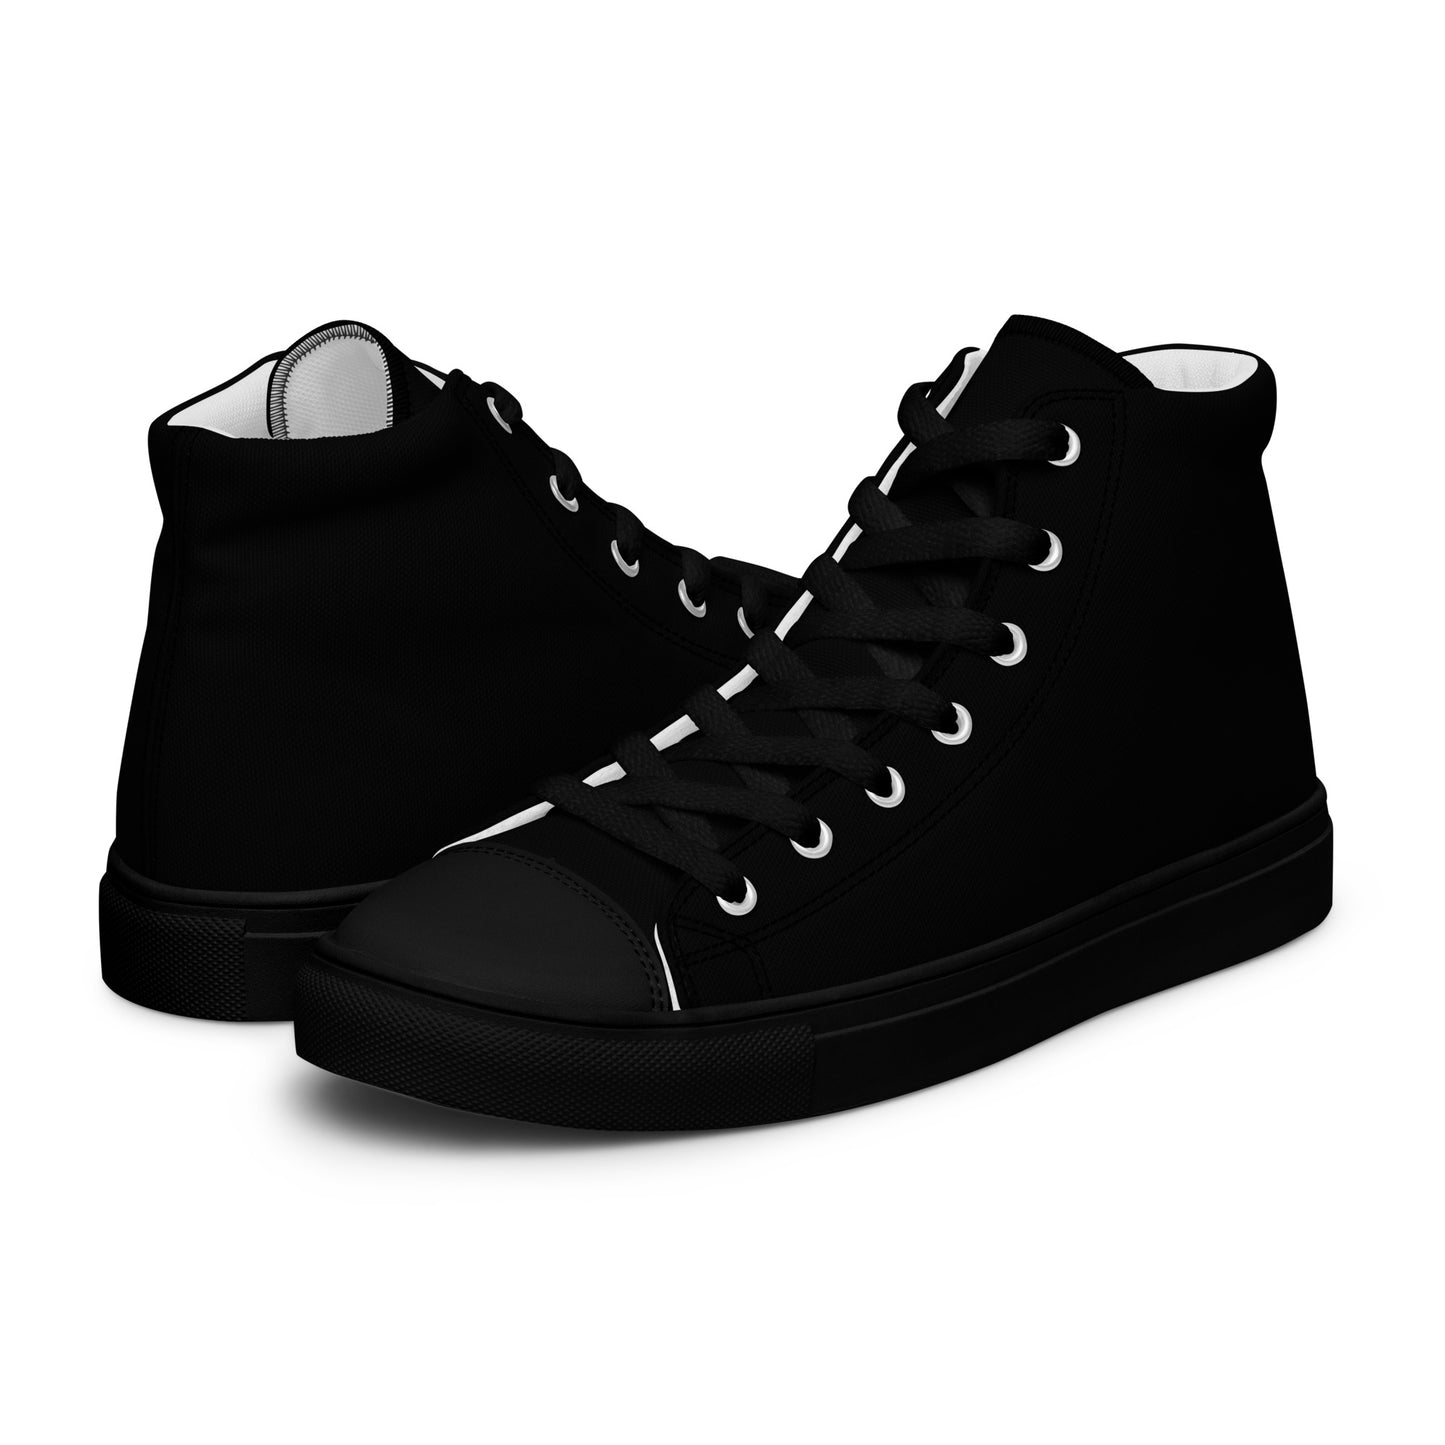 Full Black - Sustainably Made Men's High Top Canvas Shoes